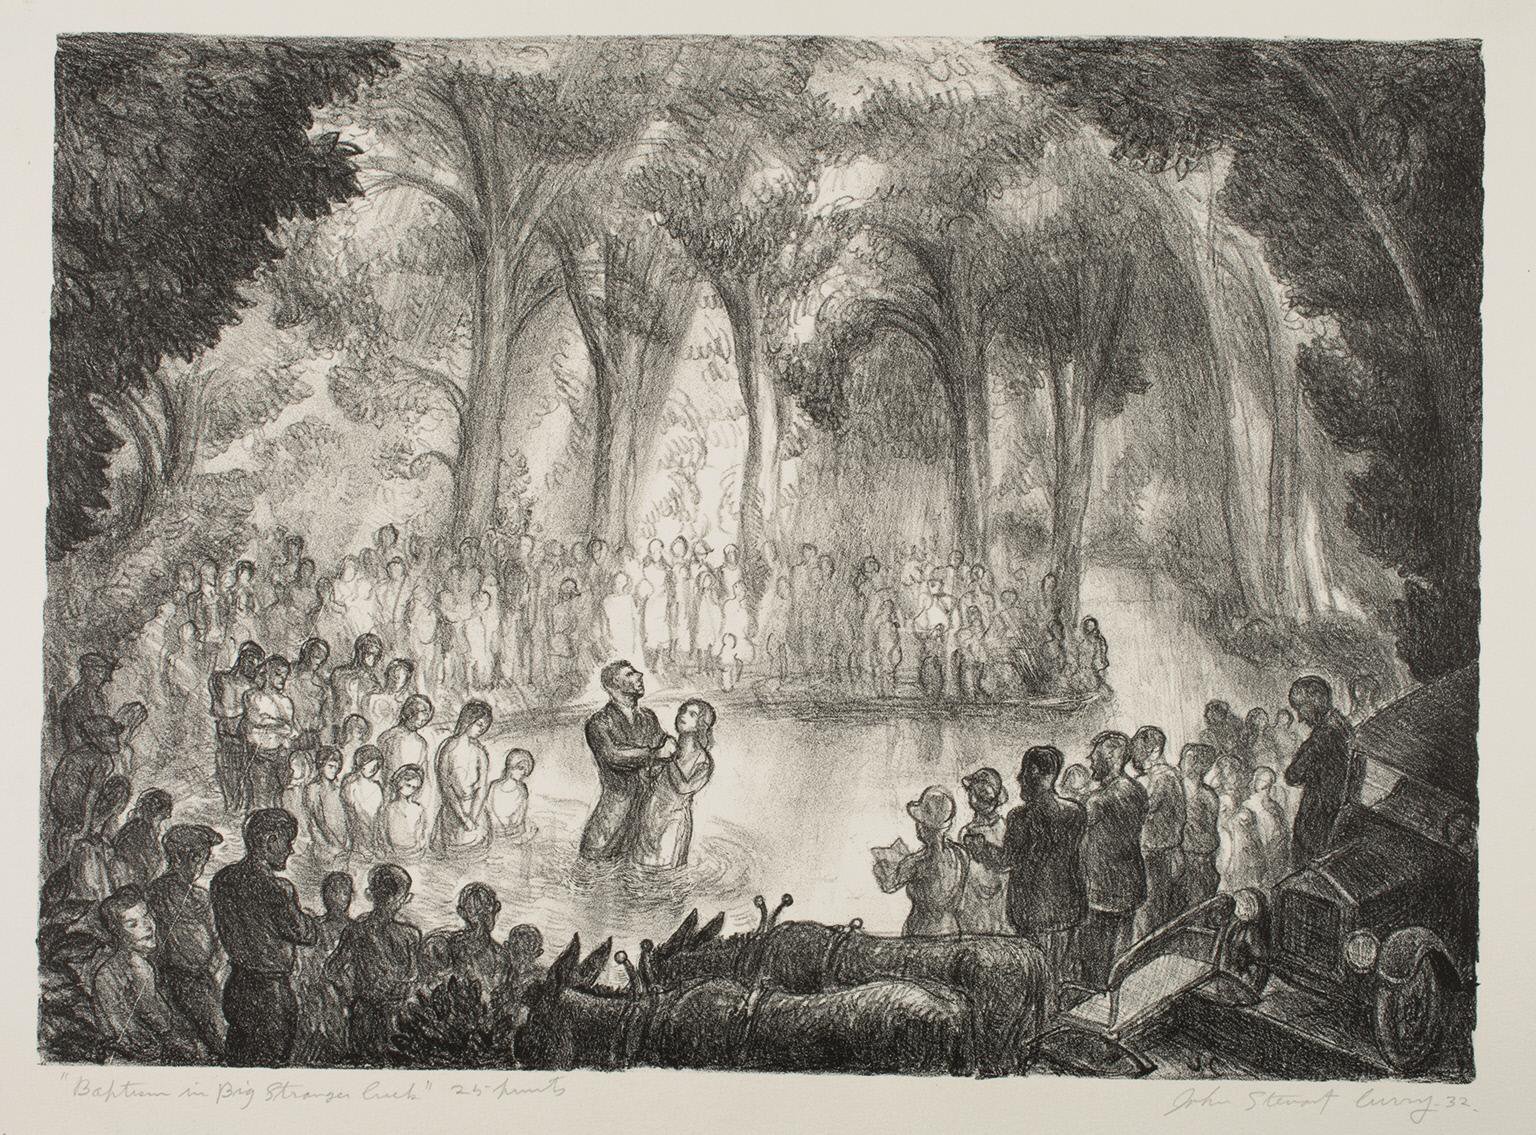 Black-and-white lithograph showing a woman in a white dress being baptized in a river by a man in a dark suit, with people crowded on the banks to watch. Large shade trees frame the composition on either side and fill the background.